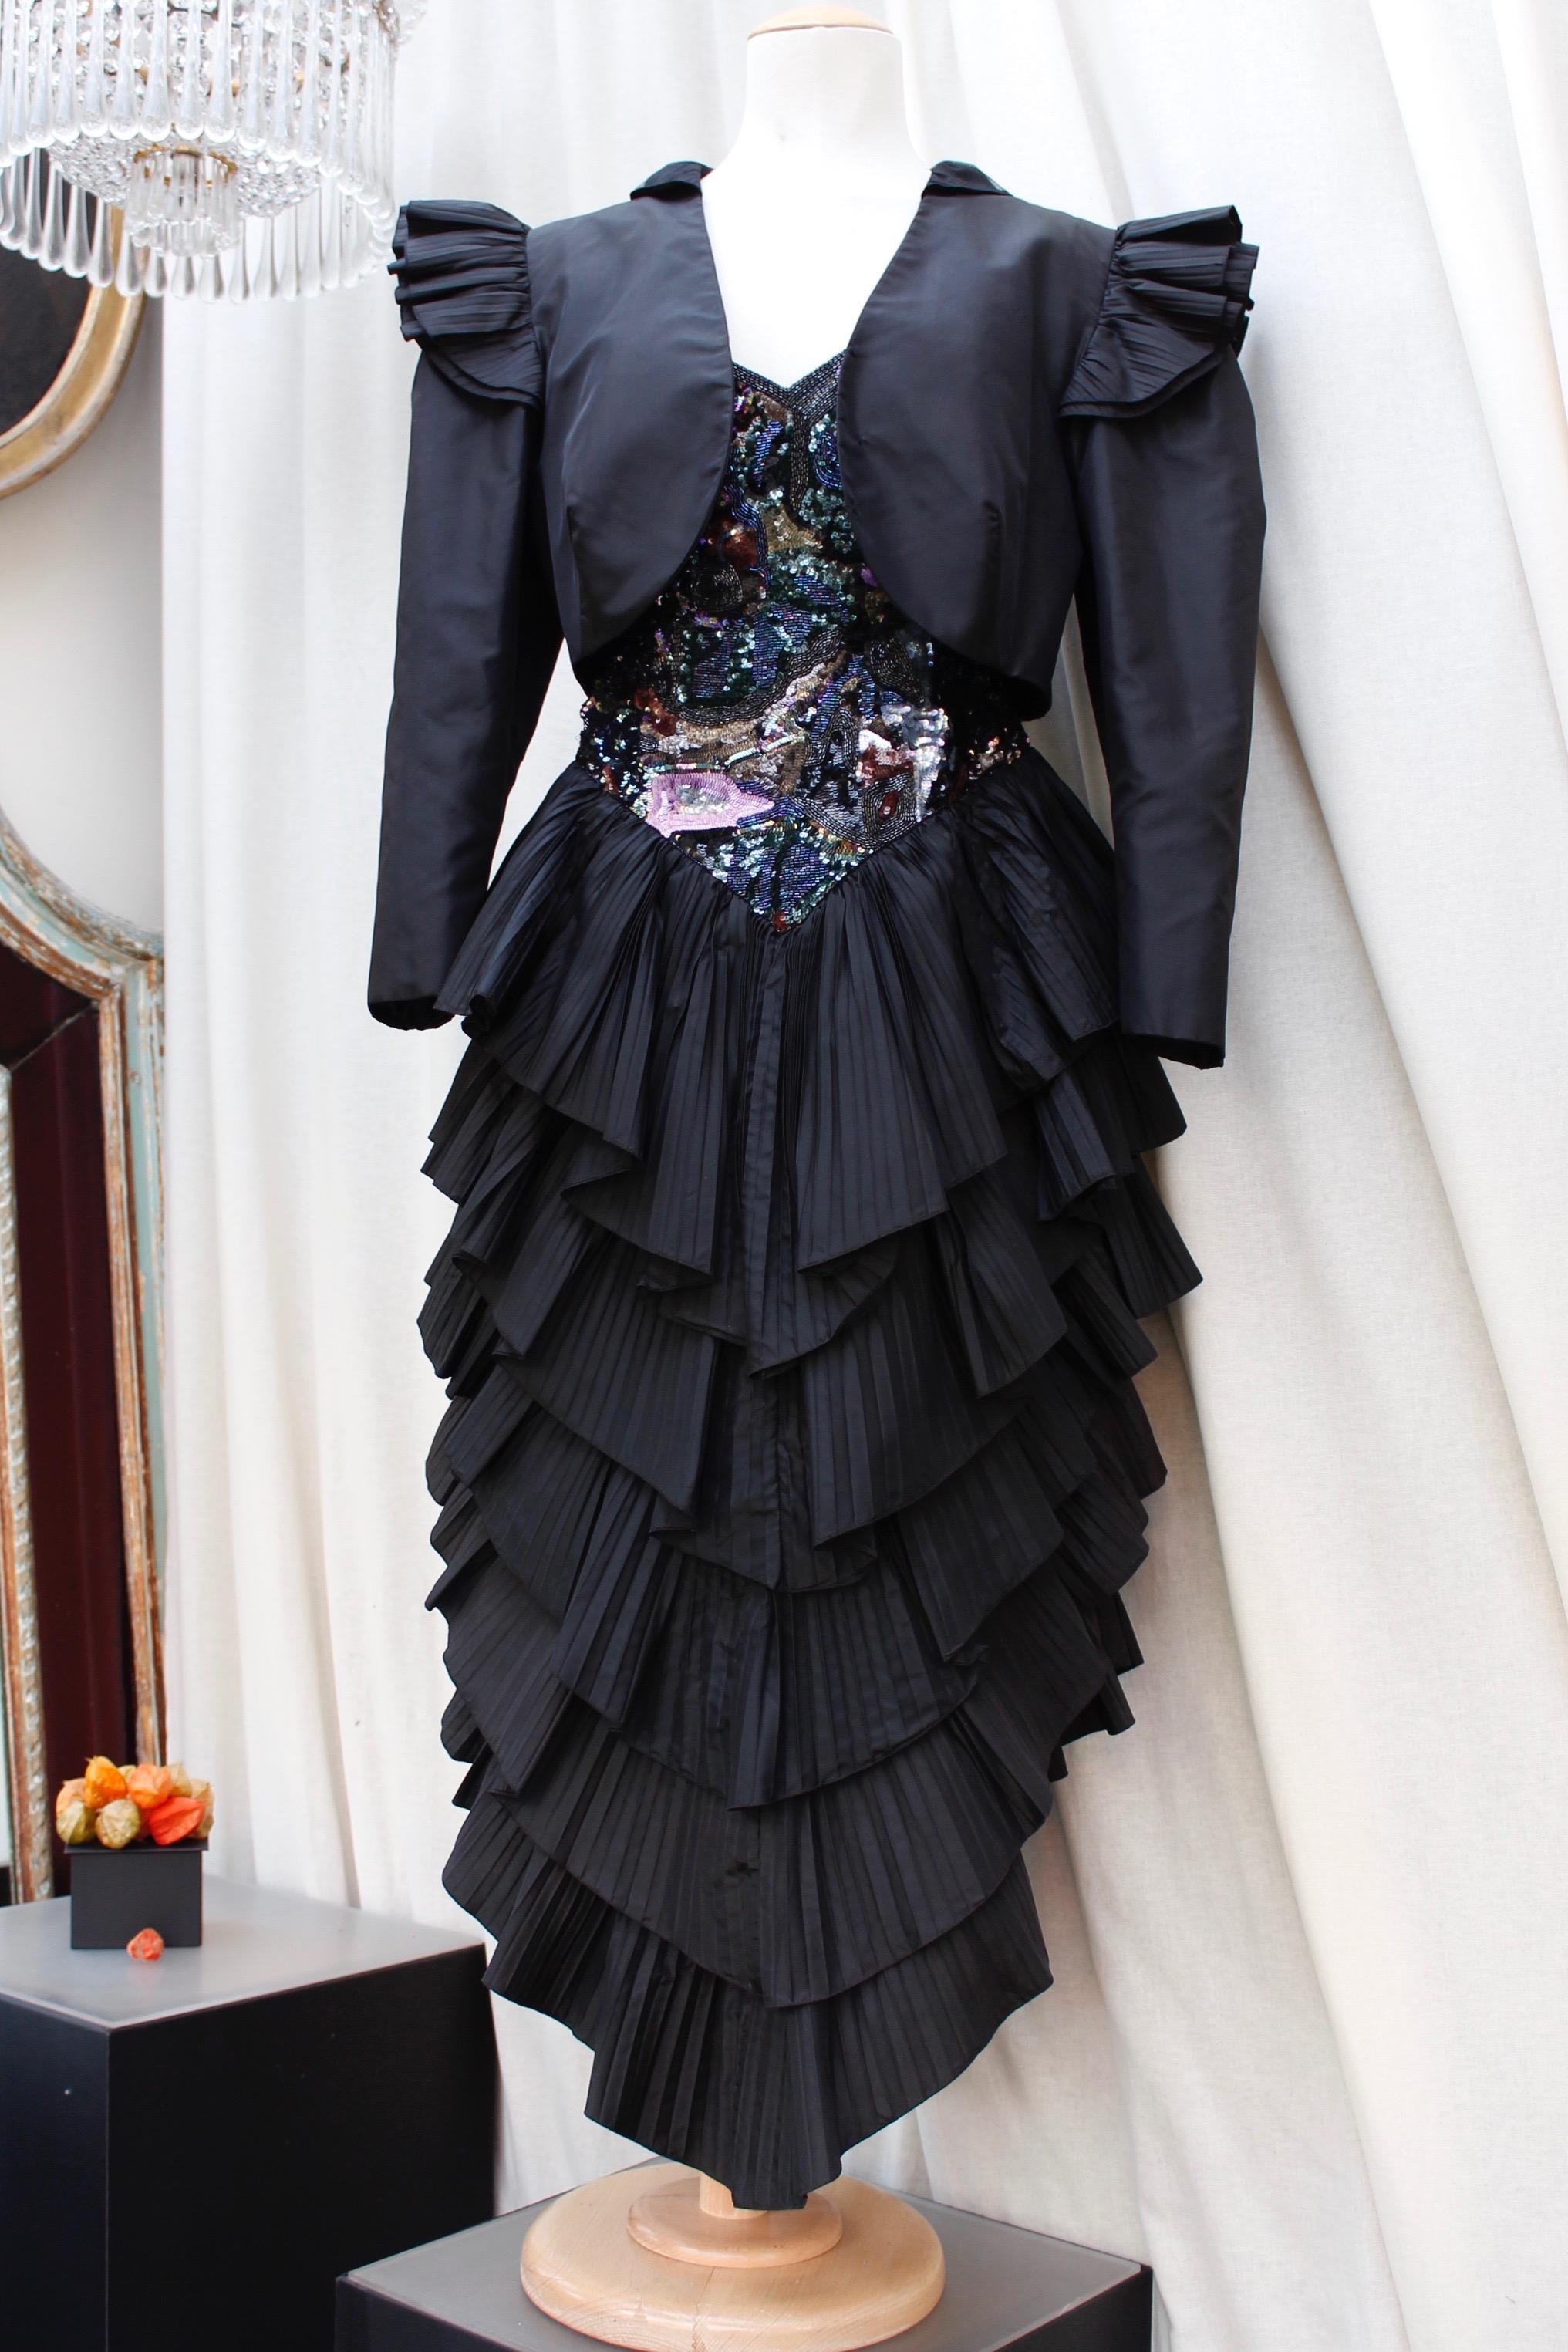 LORIS AZZARO PARIS (Made in France) Beautiful black taffeta evening comprised of a bolero and a halter dress. The jacket is decorated at the shoulders with two rows of pleated flounces. It closes with three hooks.
The bustier is entirely embroidered